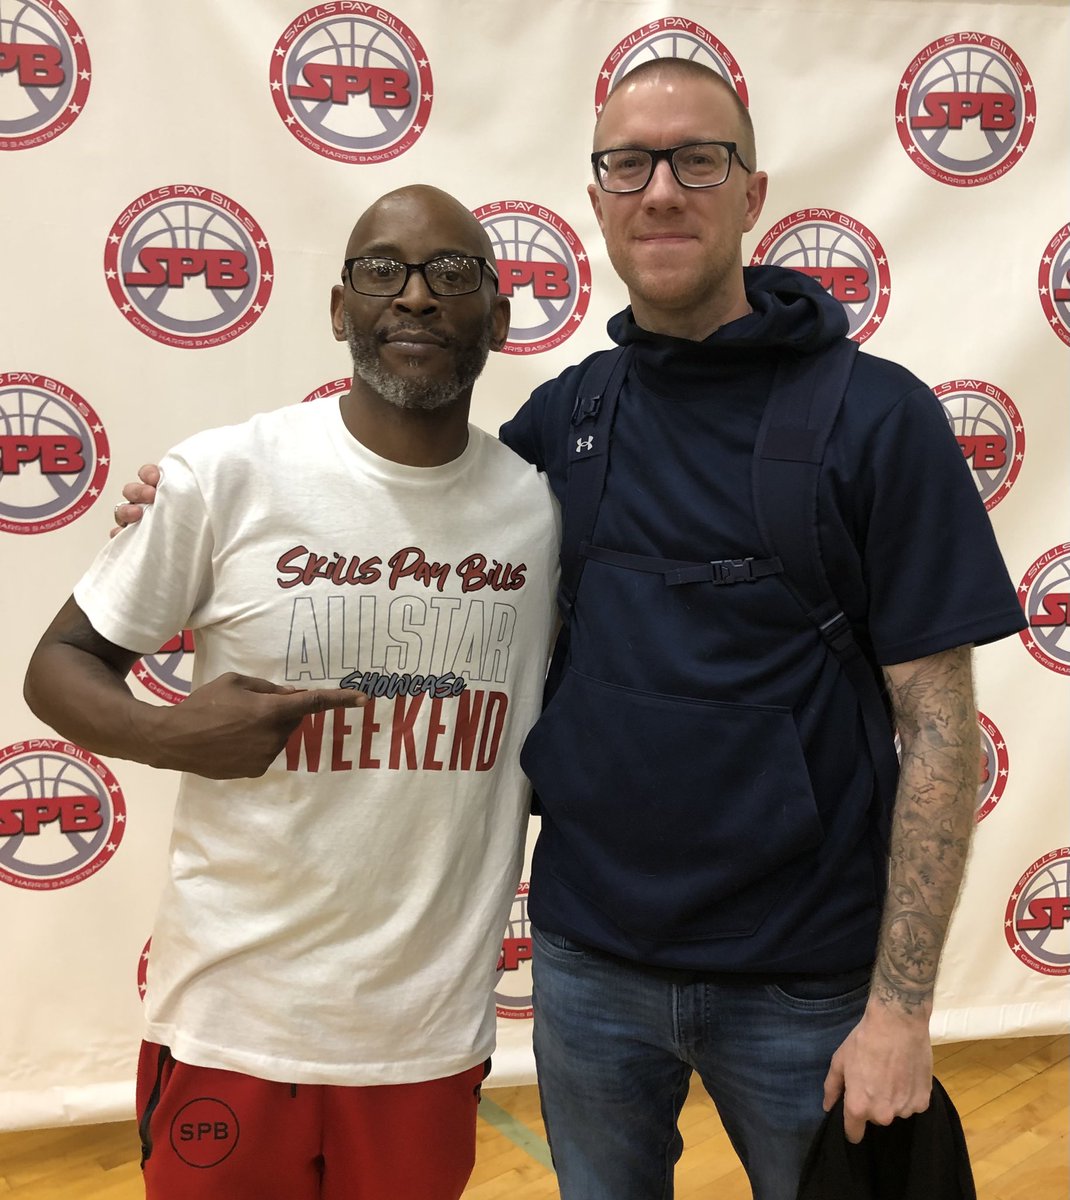 I’m blessed to be able to work for someone who shares a passion for highlighting great kids & fighting to get them opportunities to hoop at the next level. @ChrisHarrisBB is DFW hoops culture & puts together great games w @SkillsPB_Events. Can’t wait to be on the 🎤 for the next!